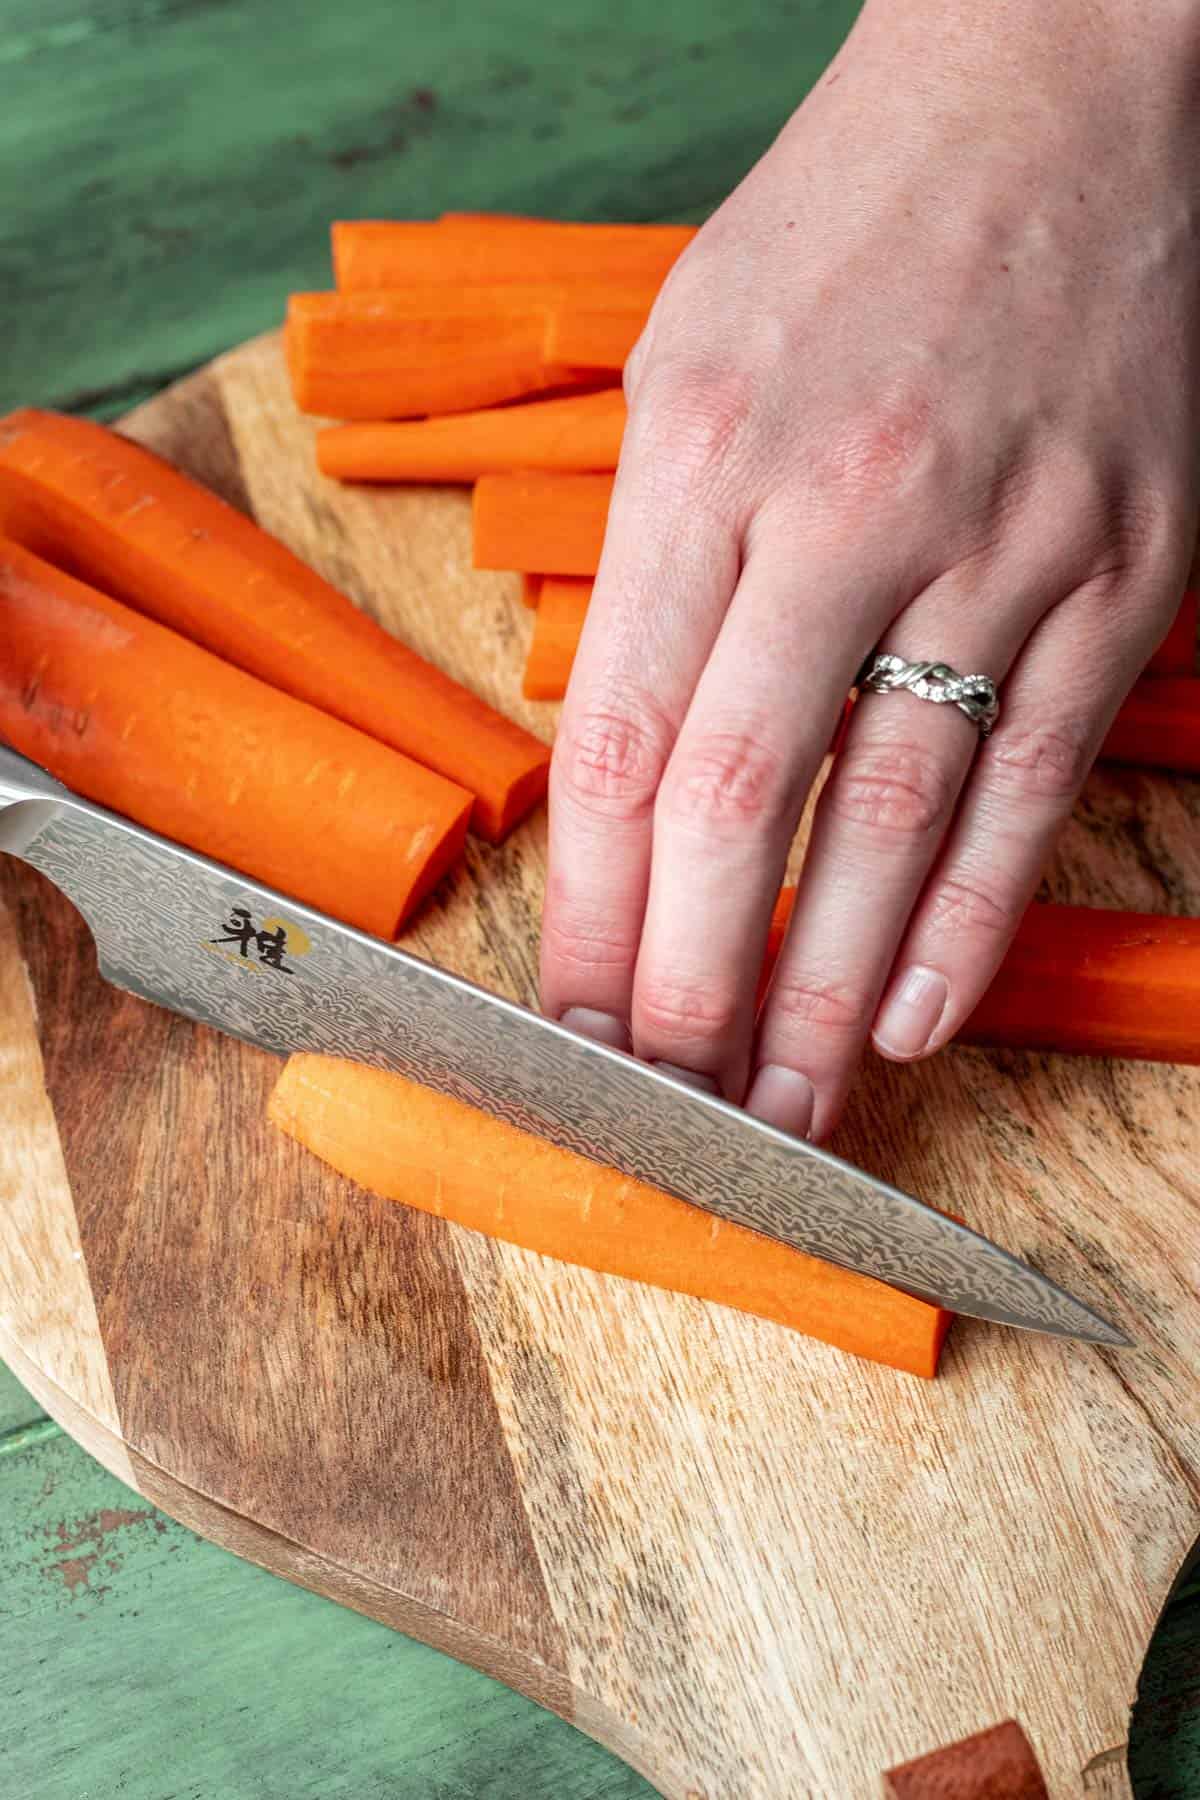 Cutting the quarters in half to create thin carrot fries.